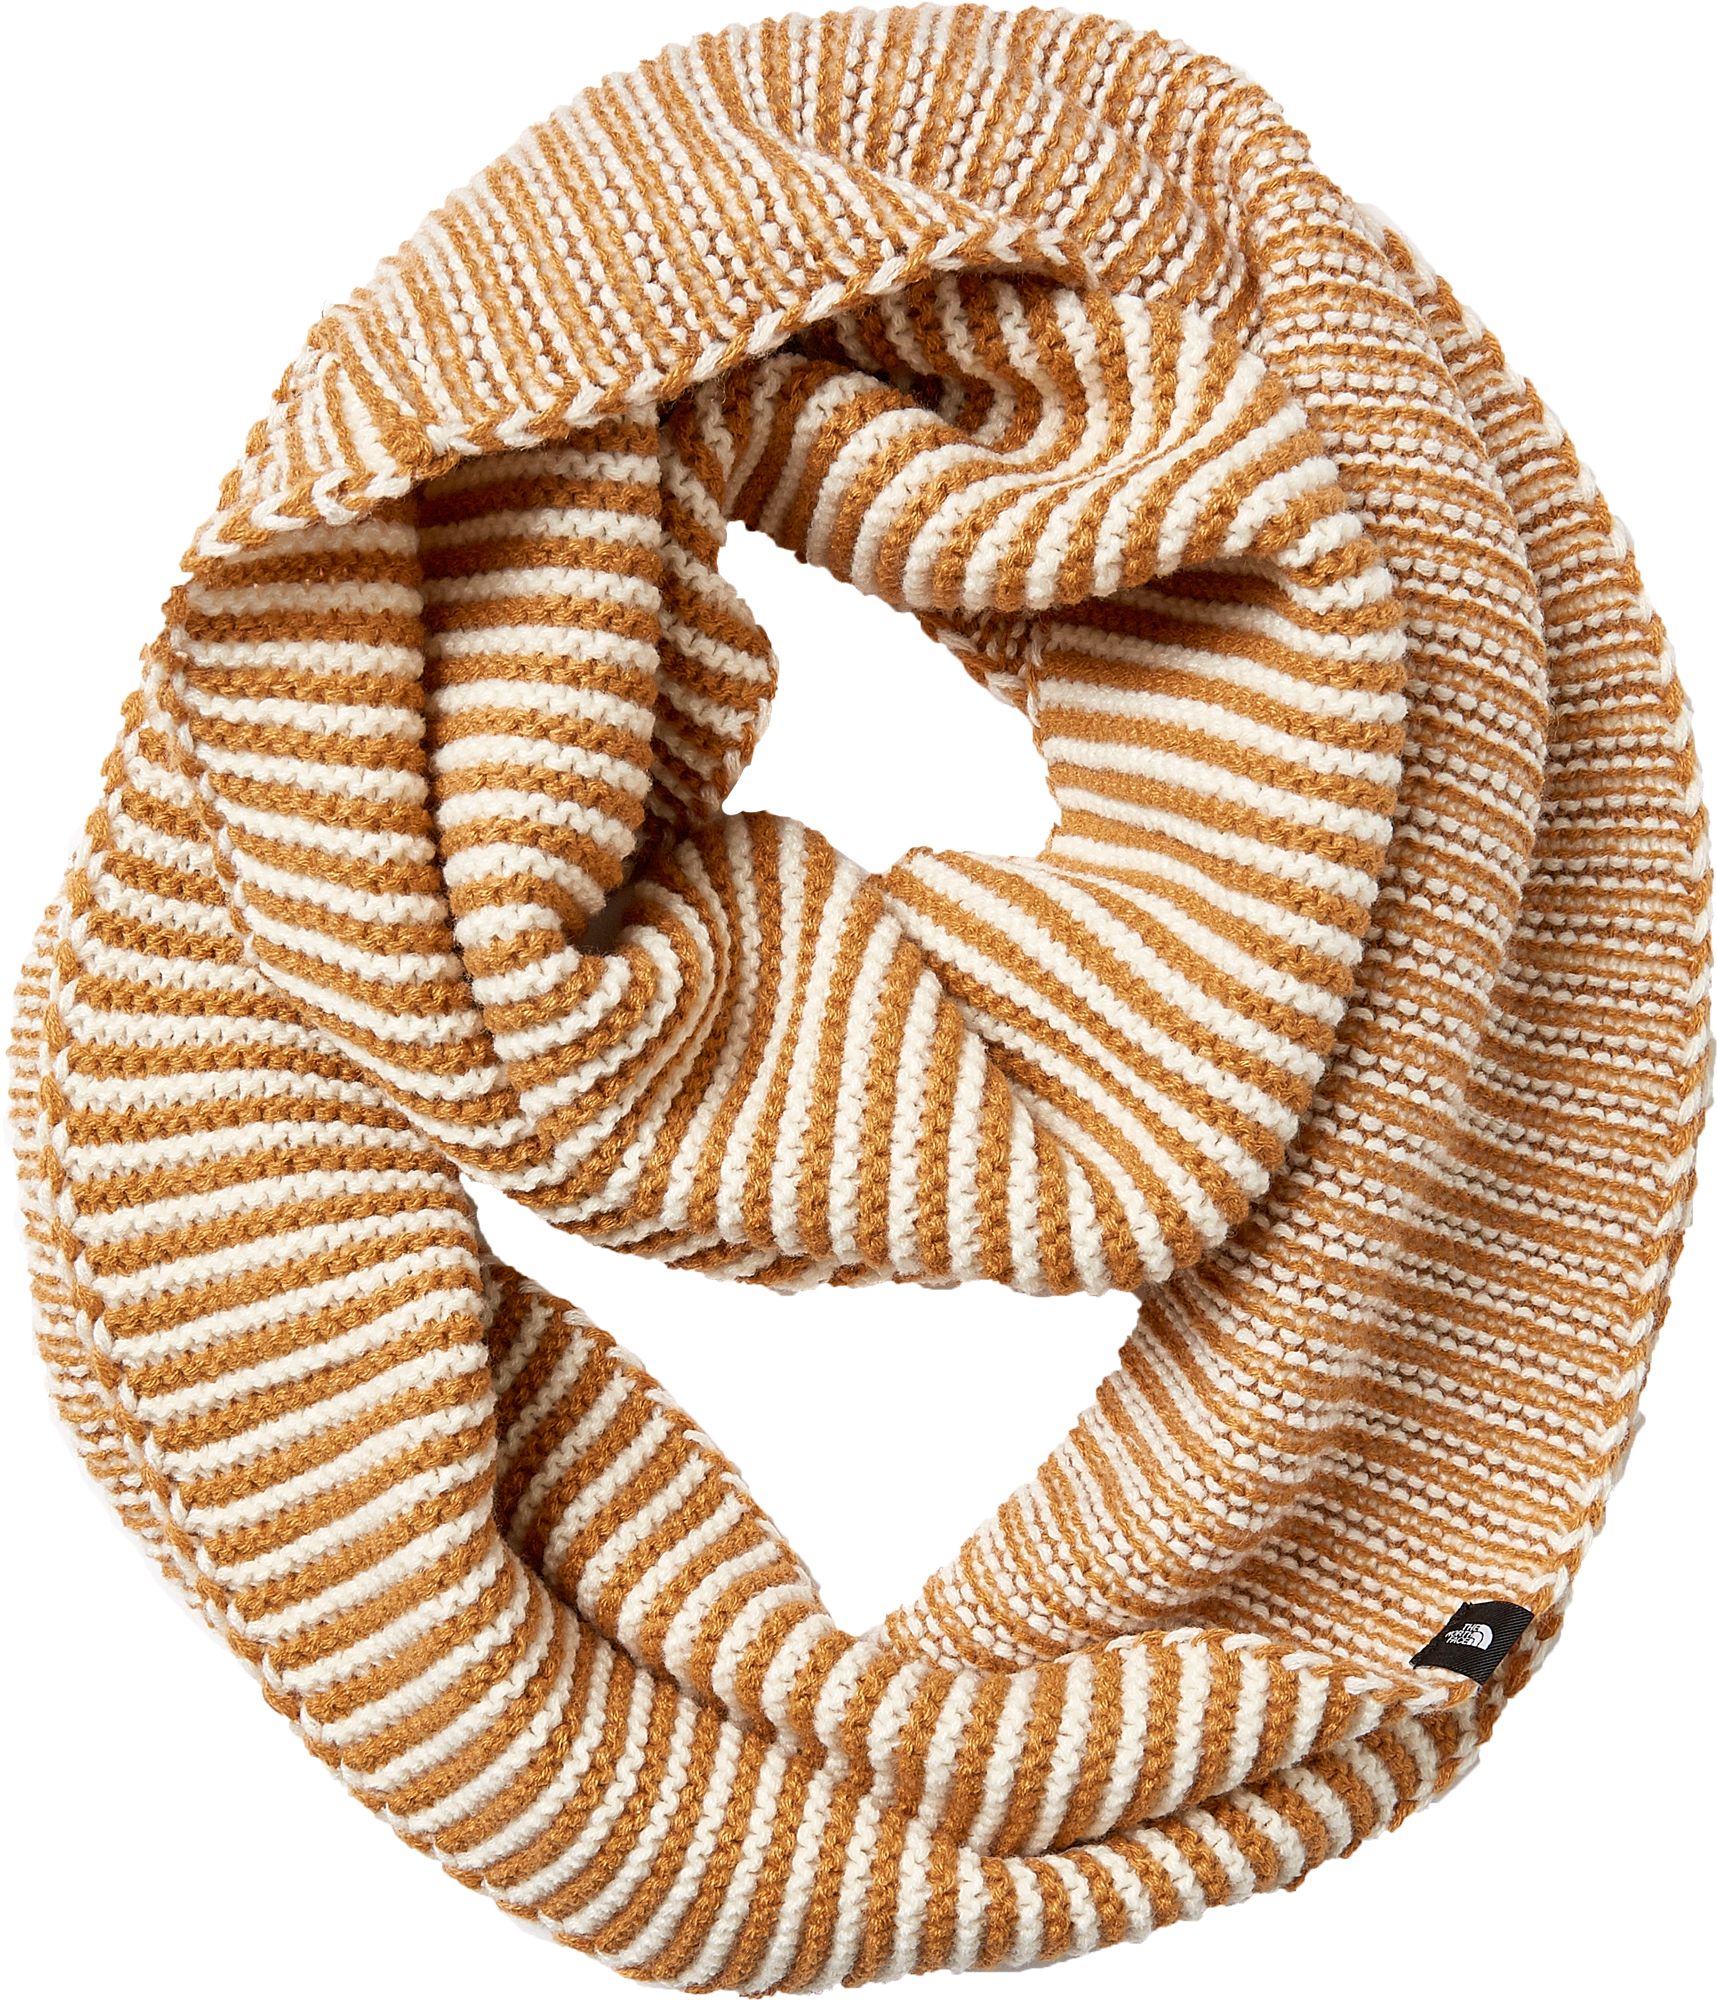 north face infinity scarf